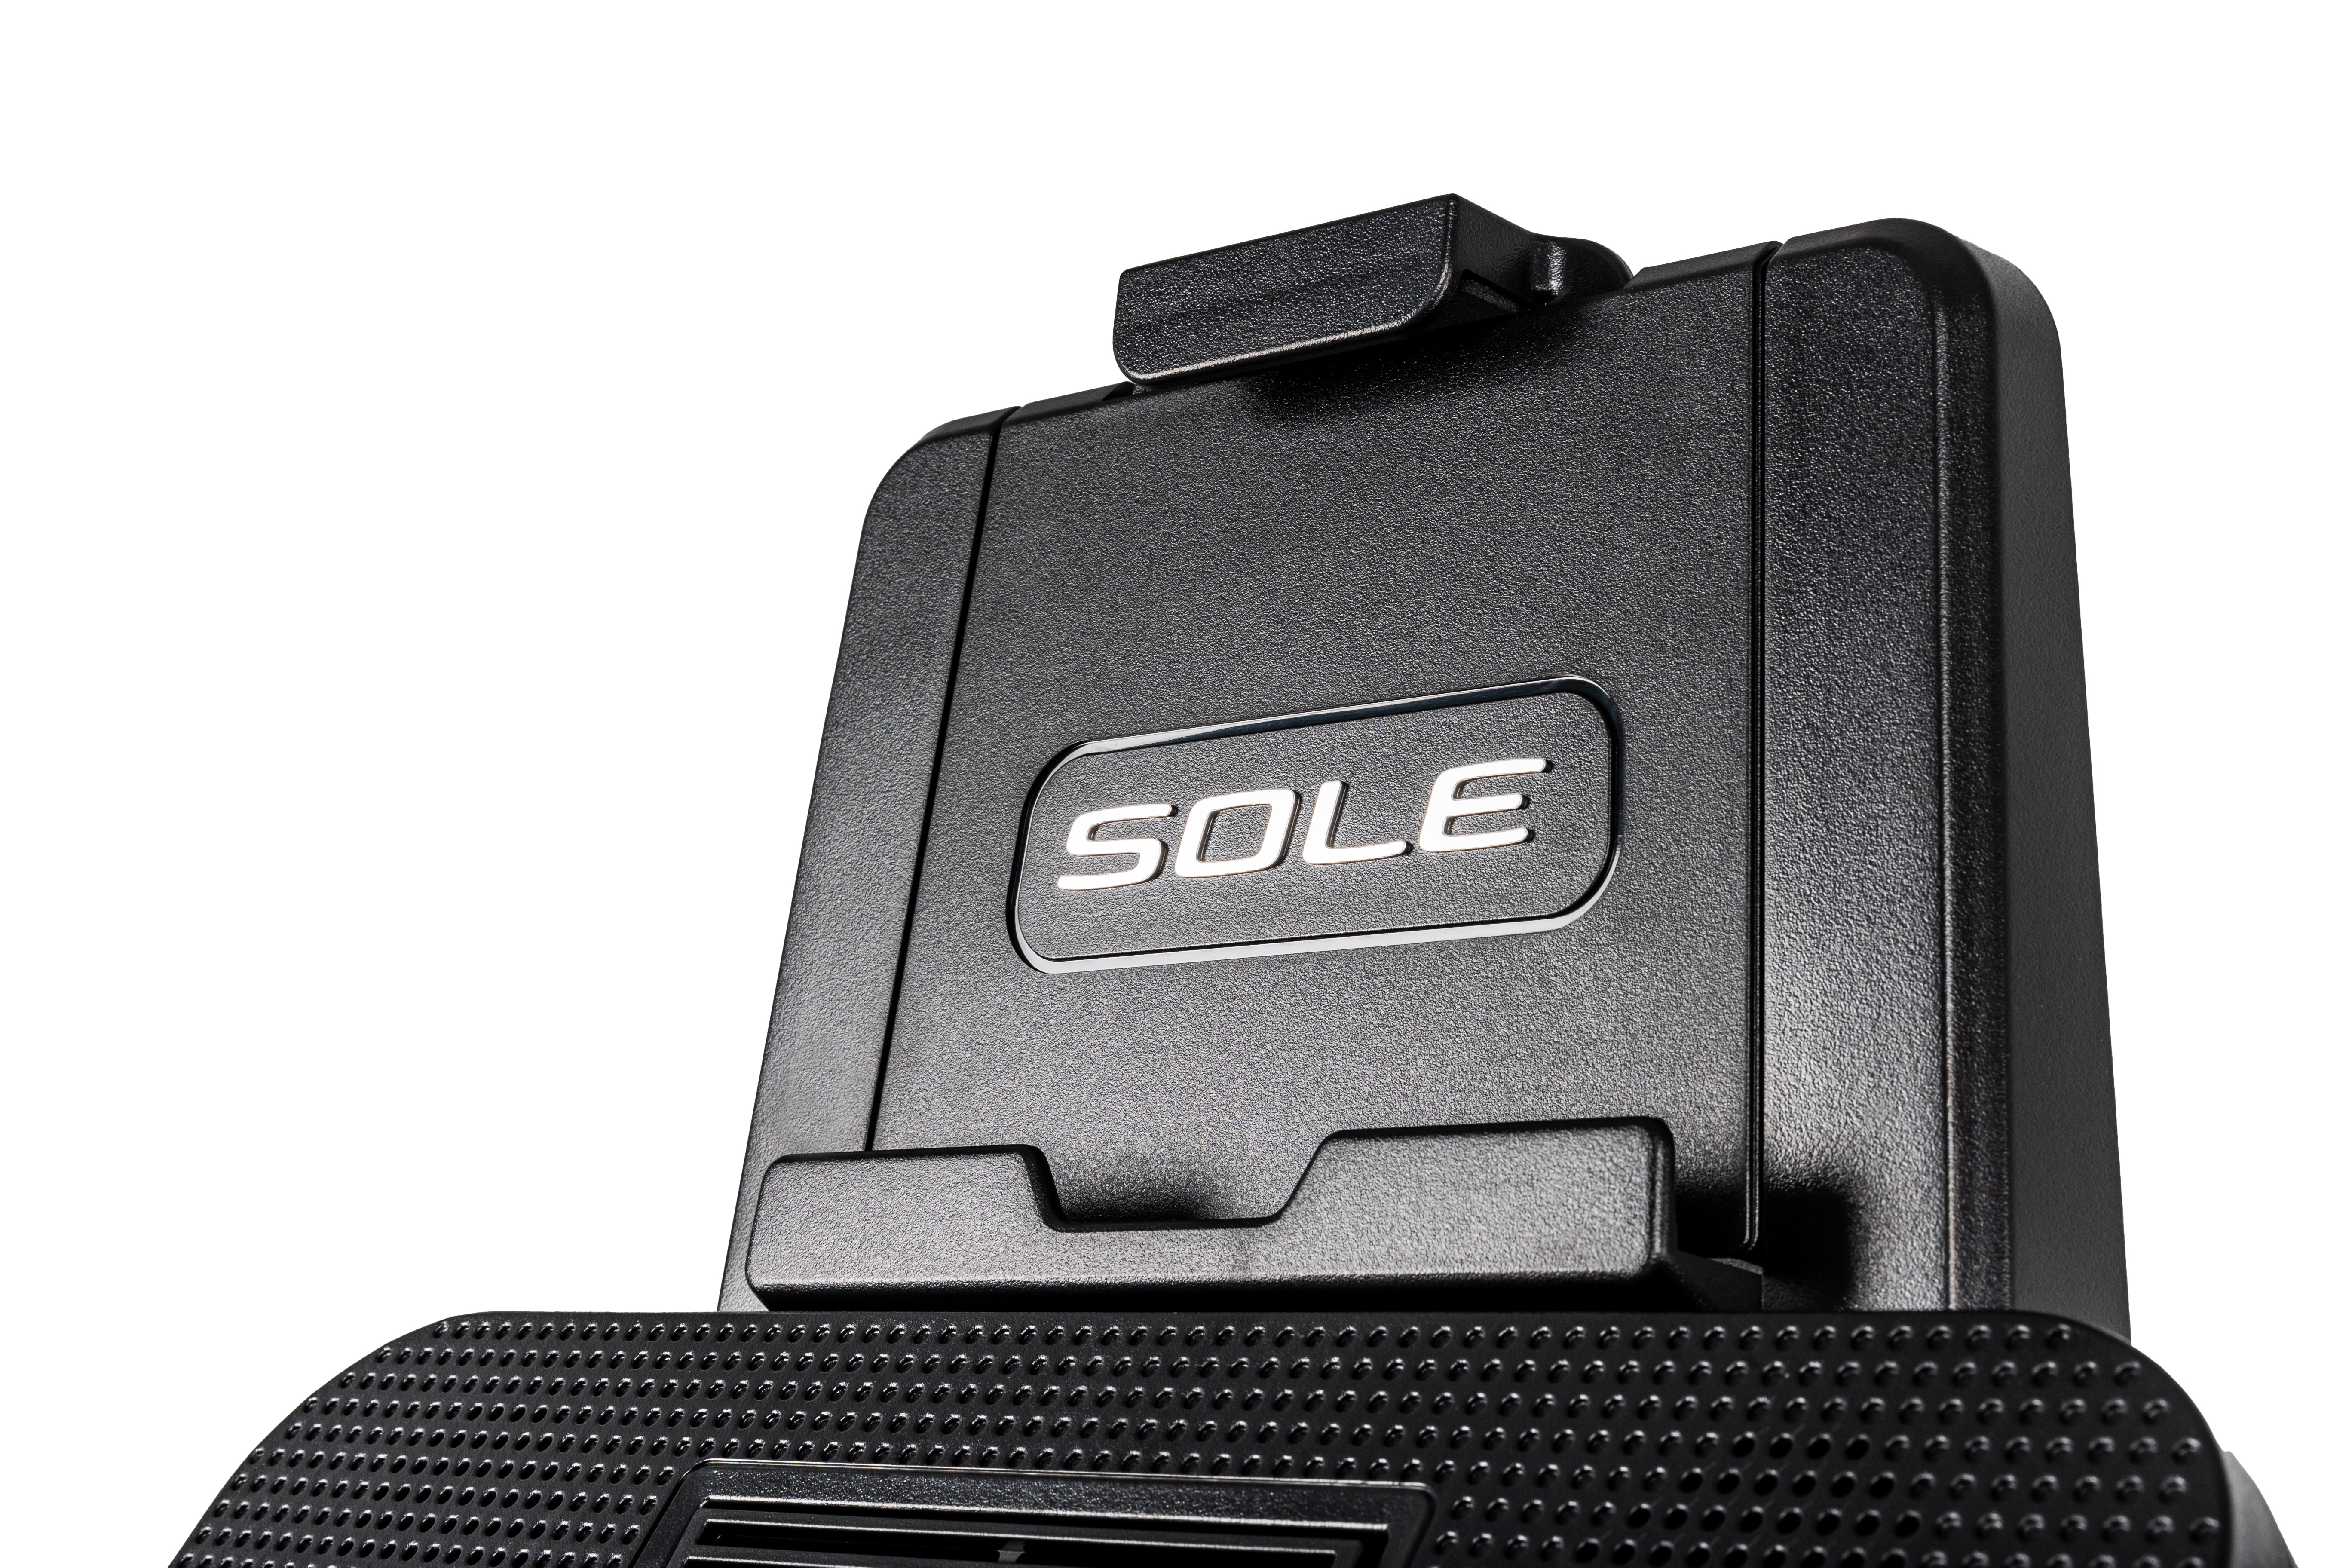 Close-up view of the top portion of the Sole E25 elliptical trainer, showcasing its textured footpad and embossed 'SOLE' logo on a sleek black surface."